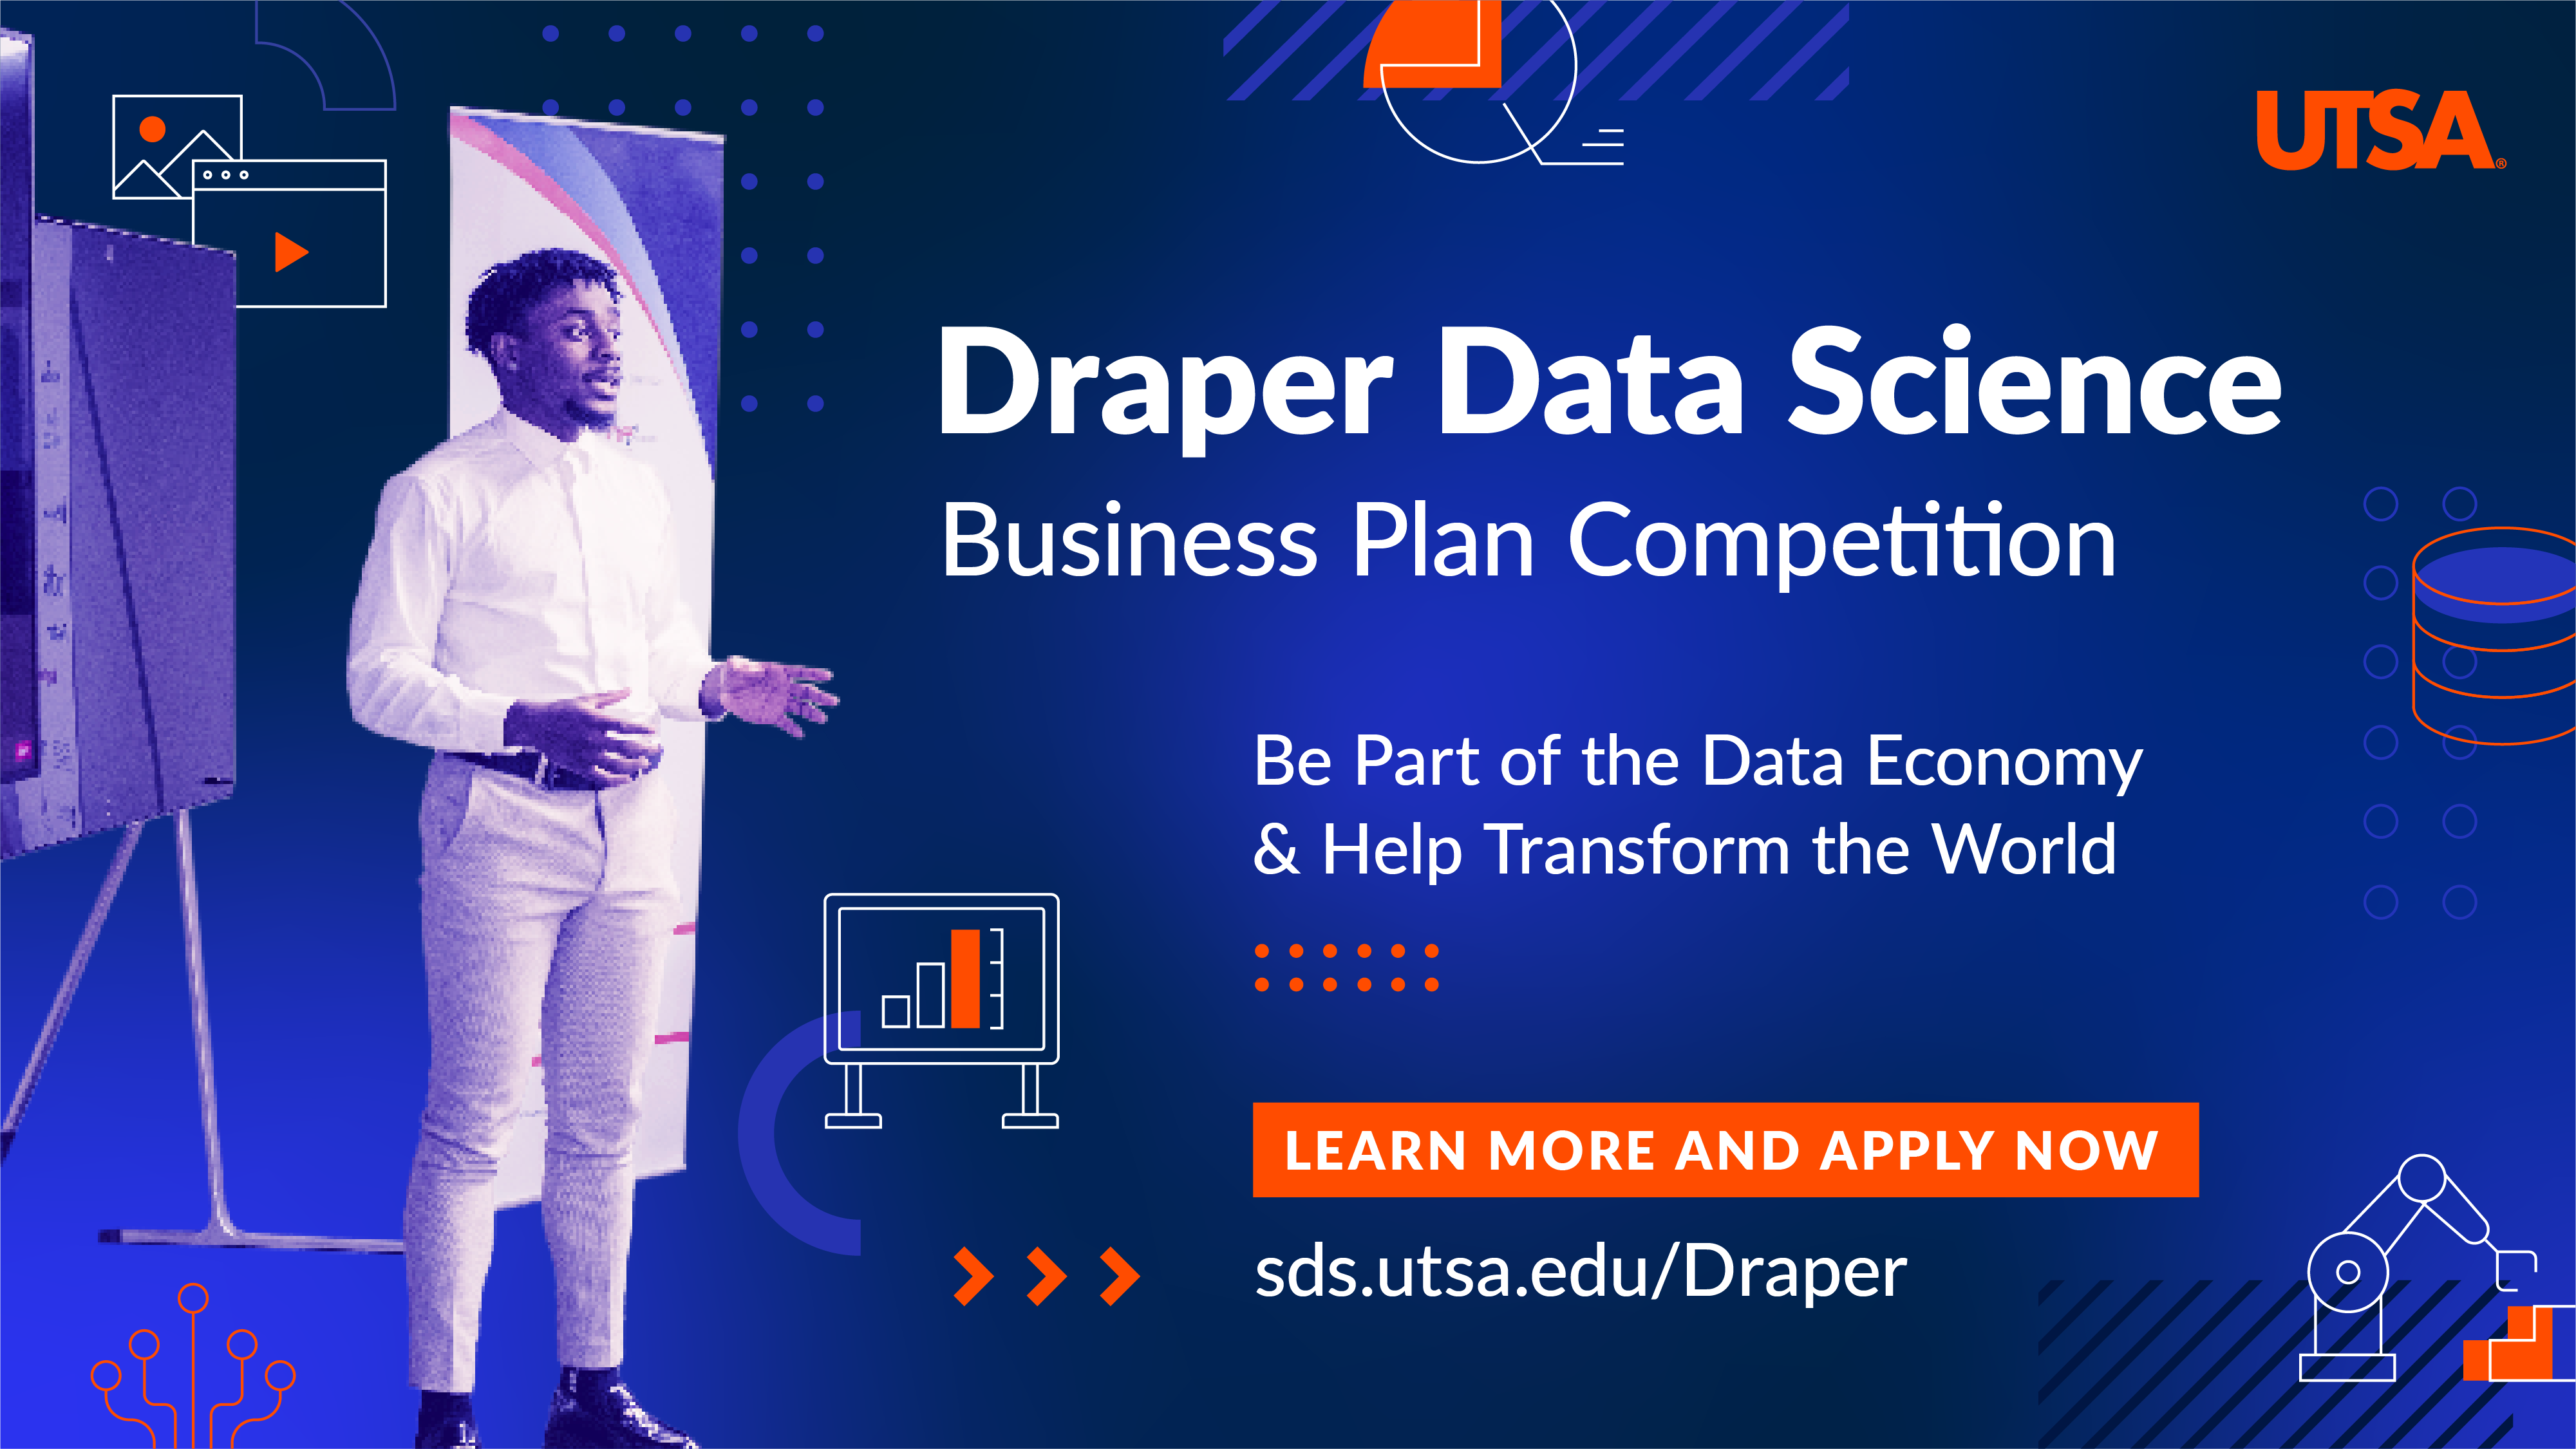 Draper Data Science Business Plan Competition